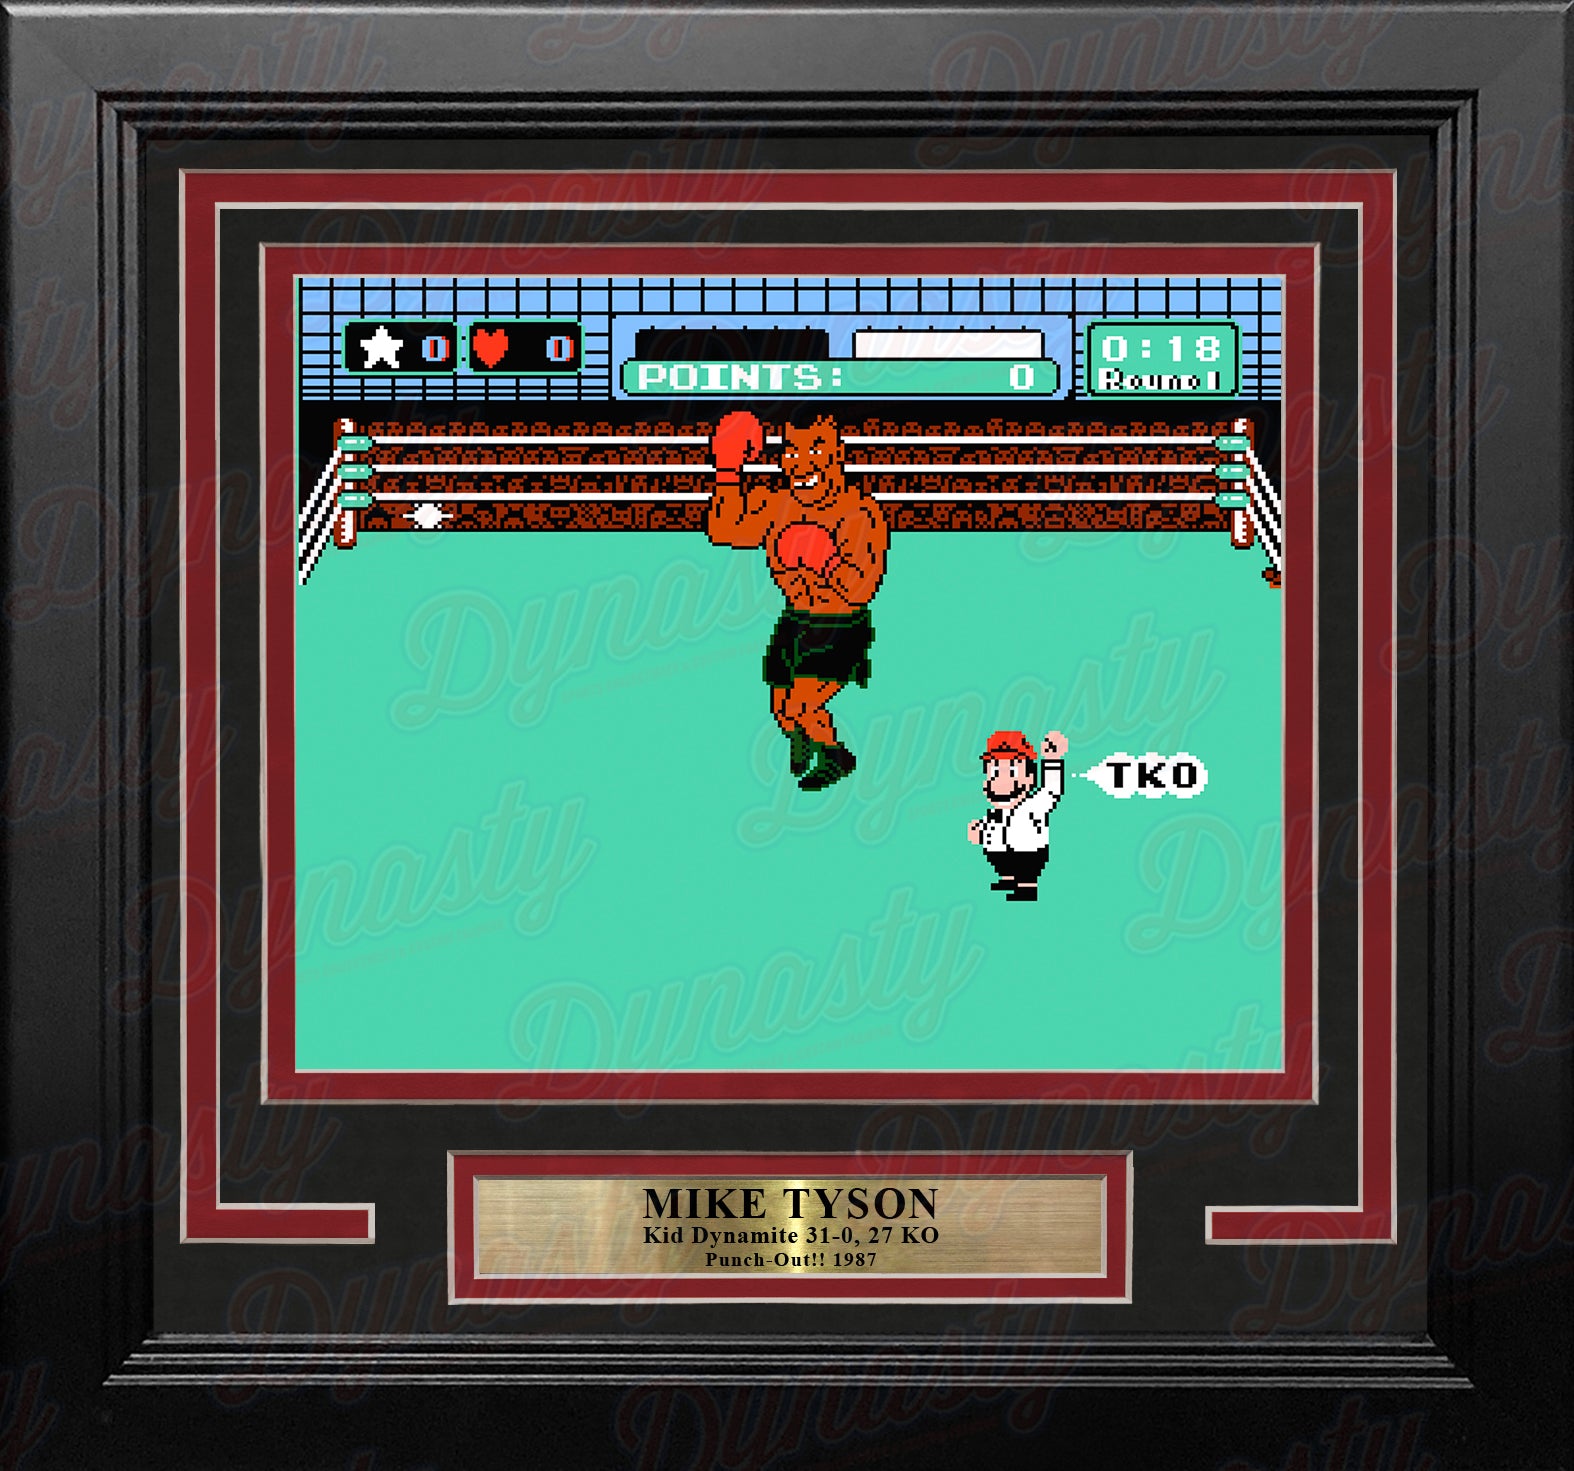 Mike Tyson Punch-Out!! 8" x 10" Framed Video Game Boxing Photo - Dynasty Sports & Framing 